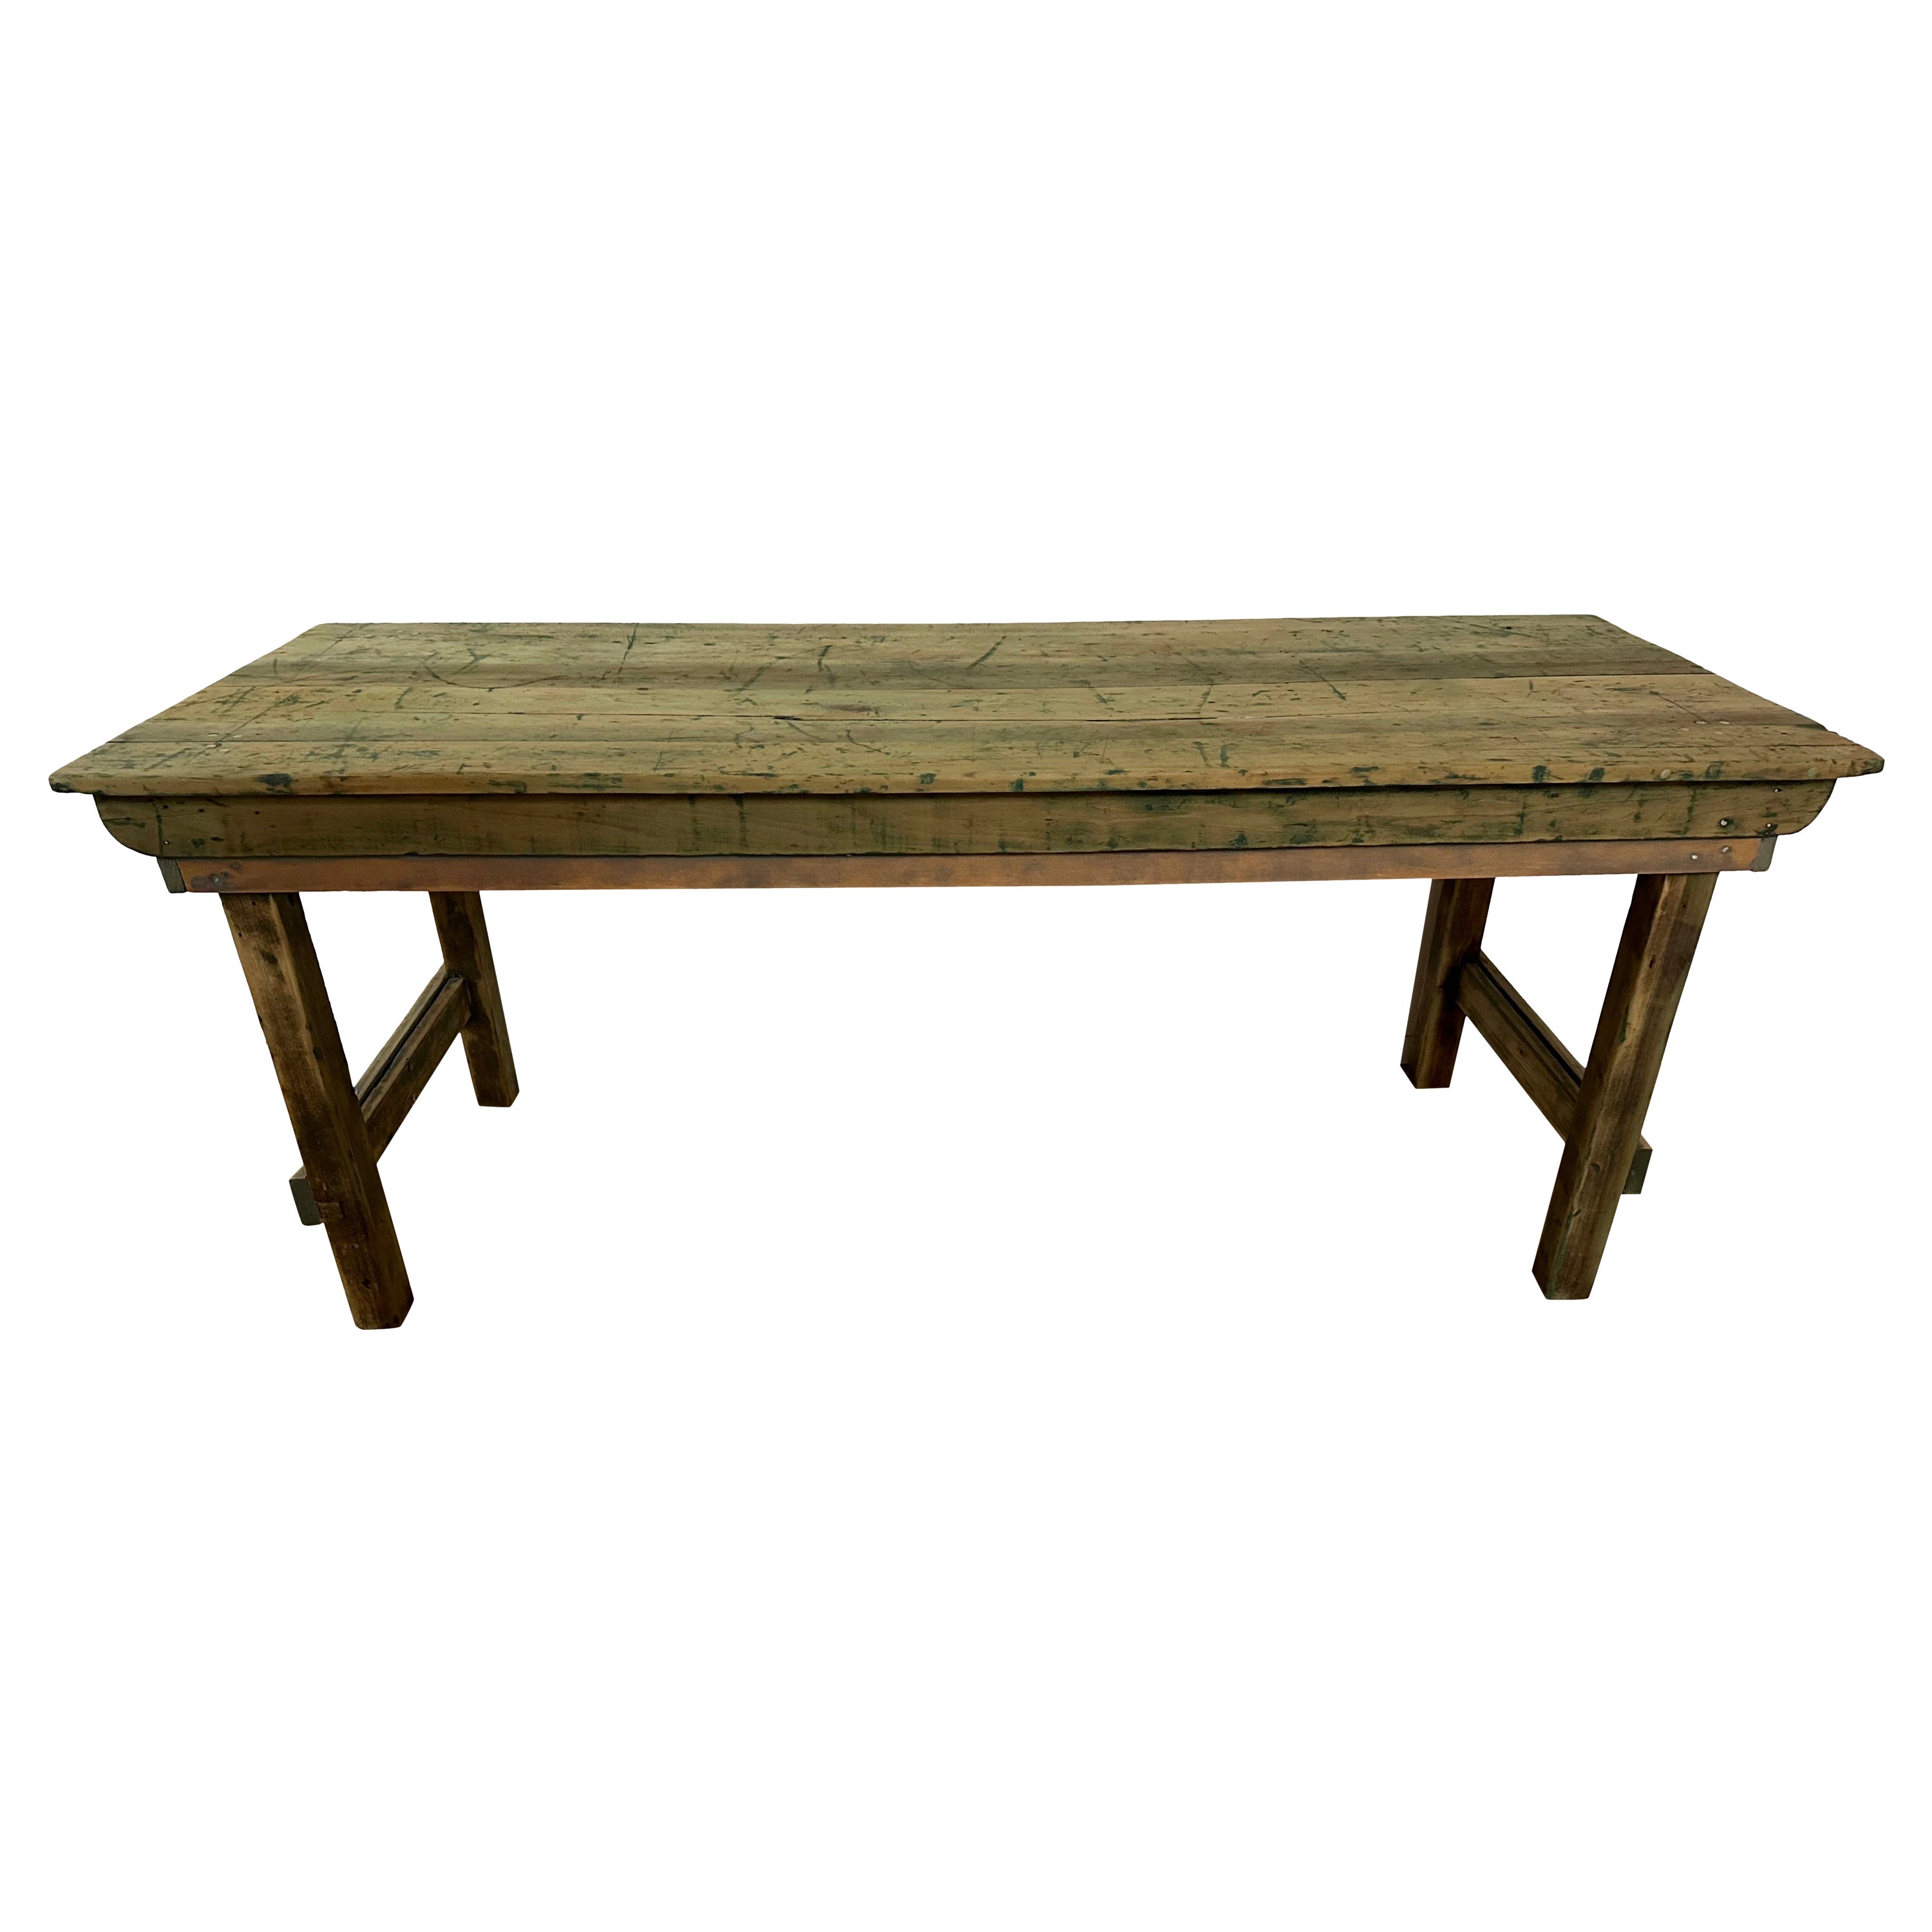 Antique Farm House Dining or Work Table